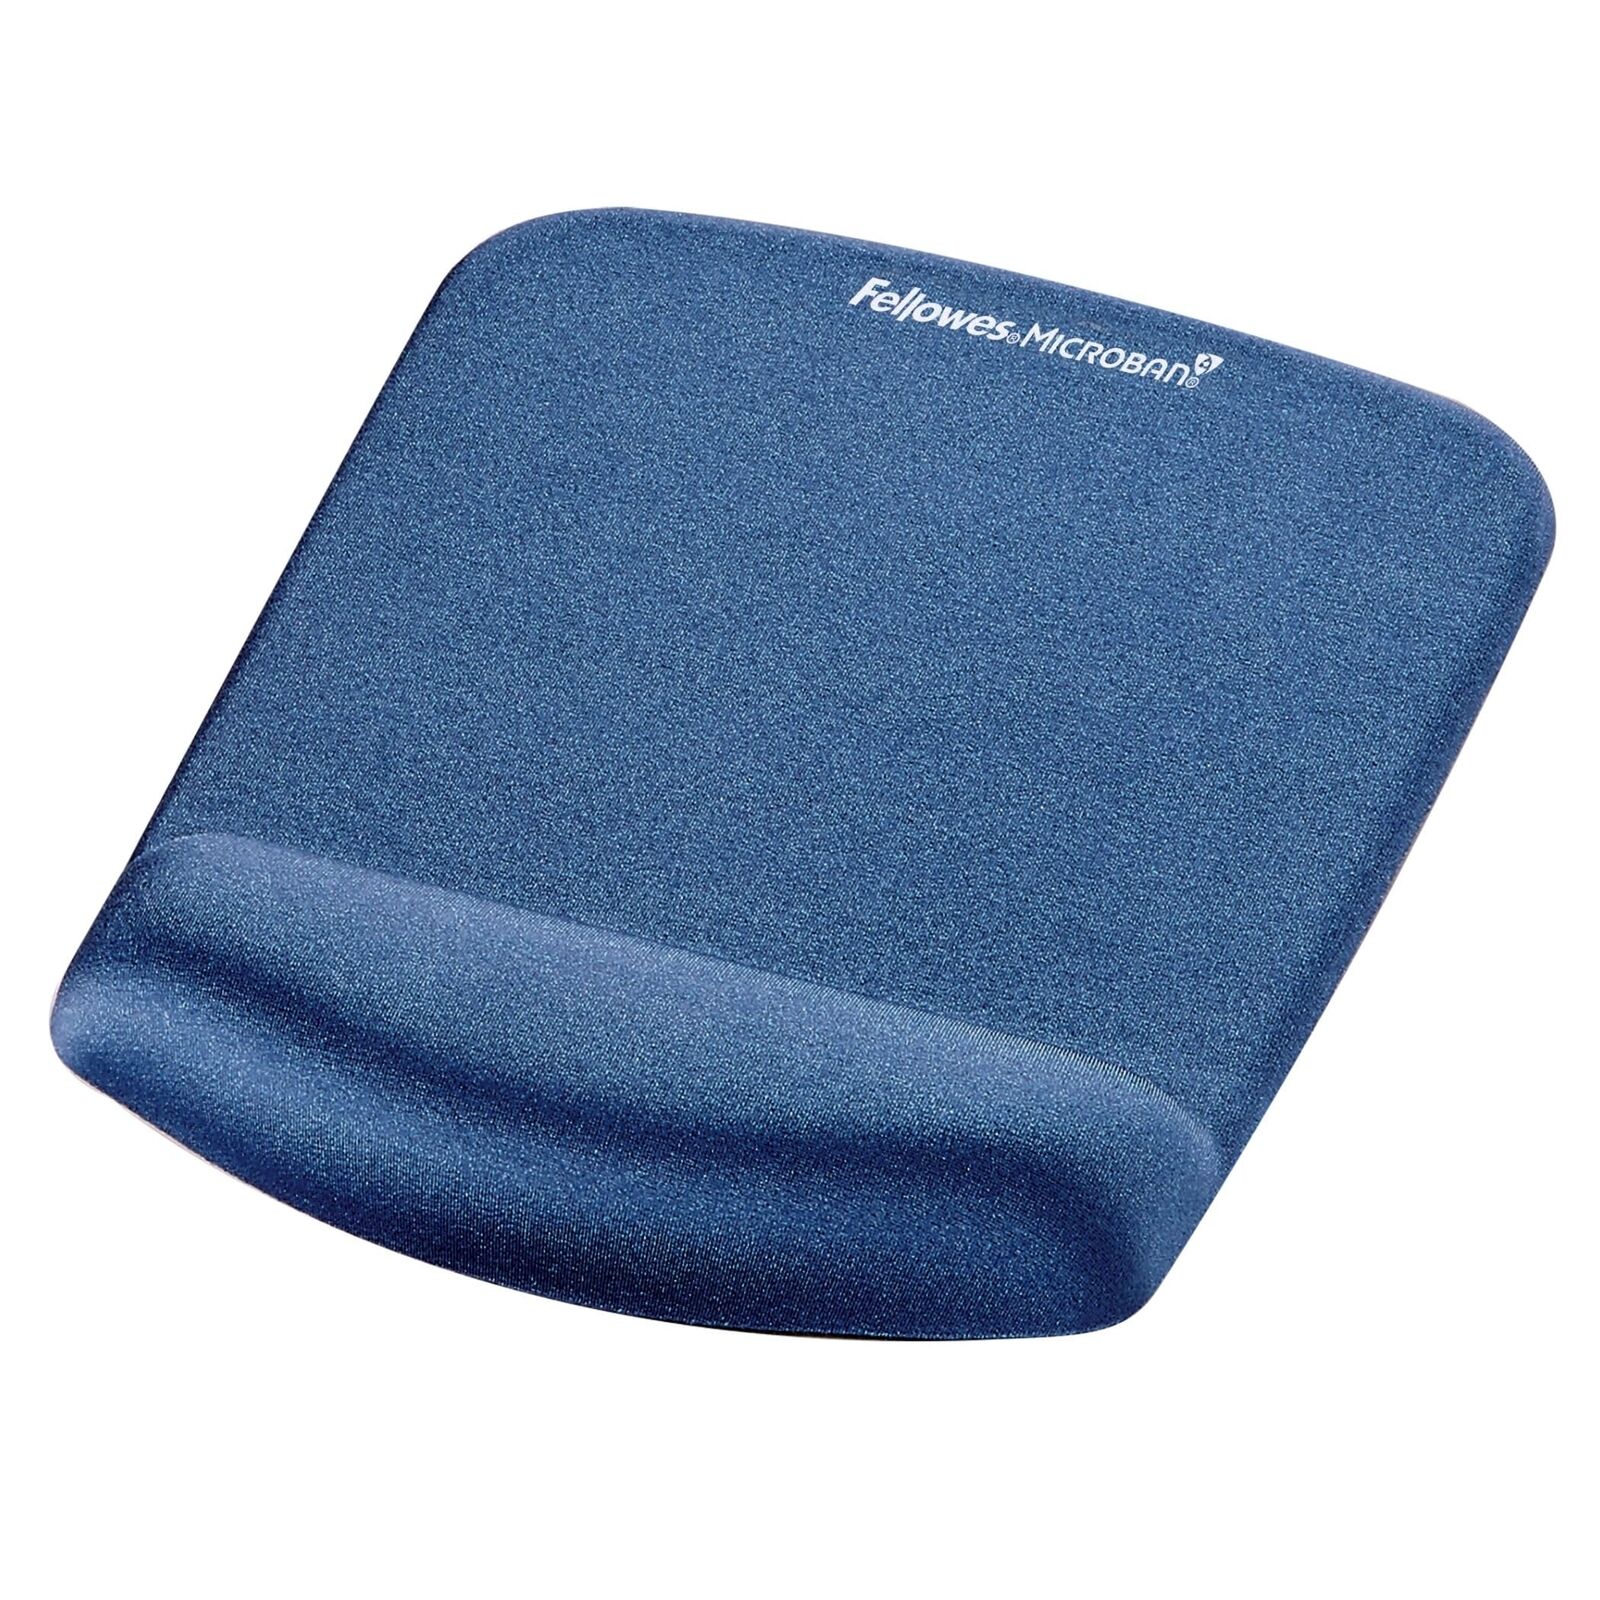 Fellowes 9287302 PlushTouch Mousepad Wrist Support with Microban - Blue Blue Plu